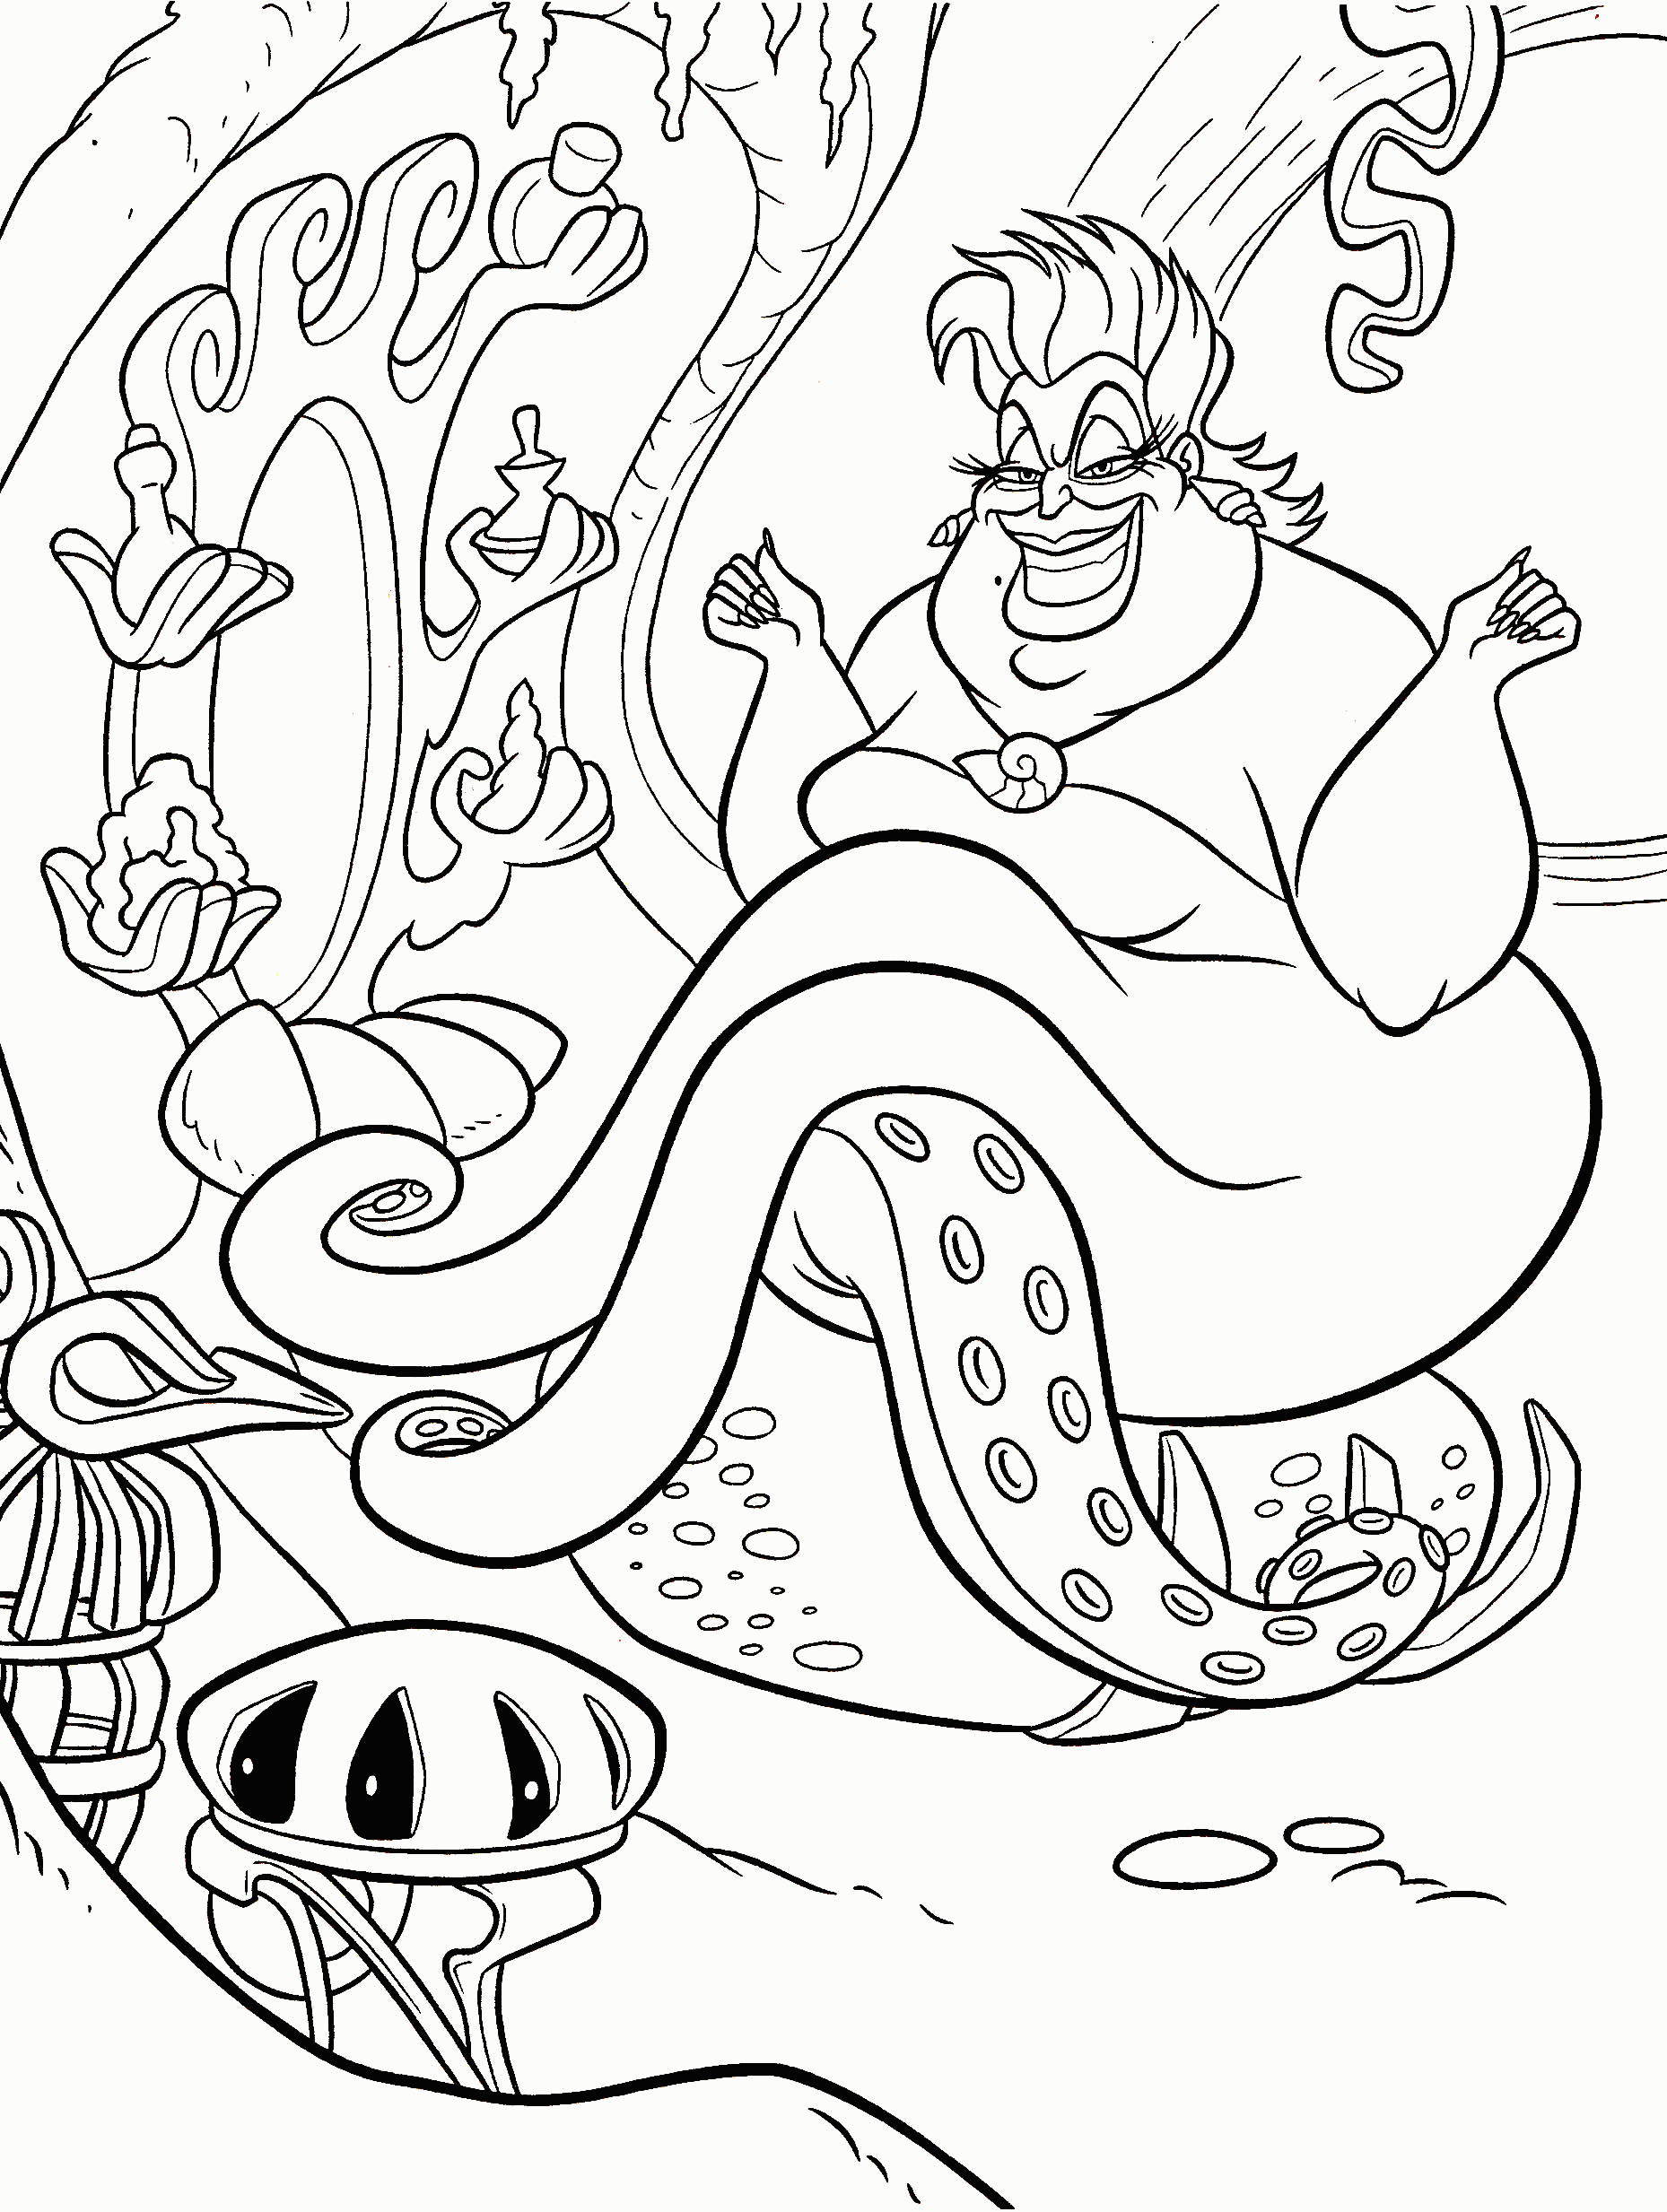 The Little Mermaid Coloring Pages Printable - Coloring Home